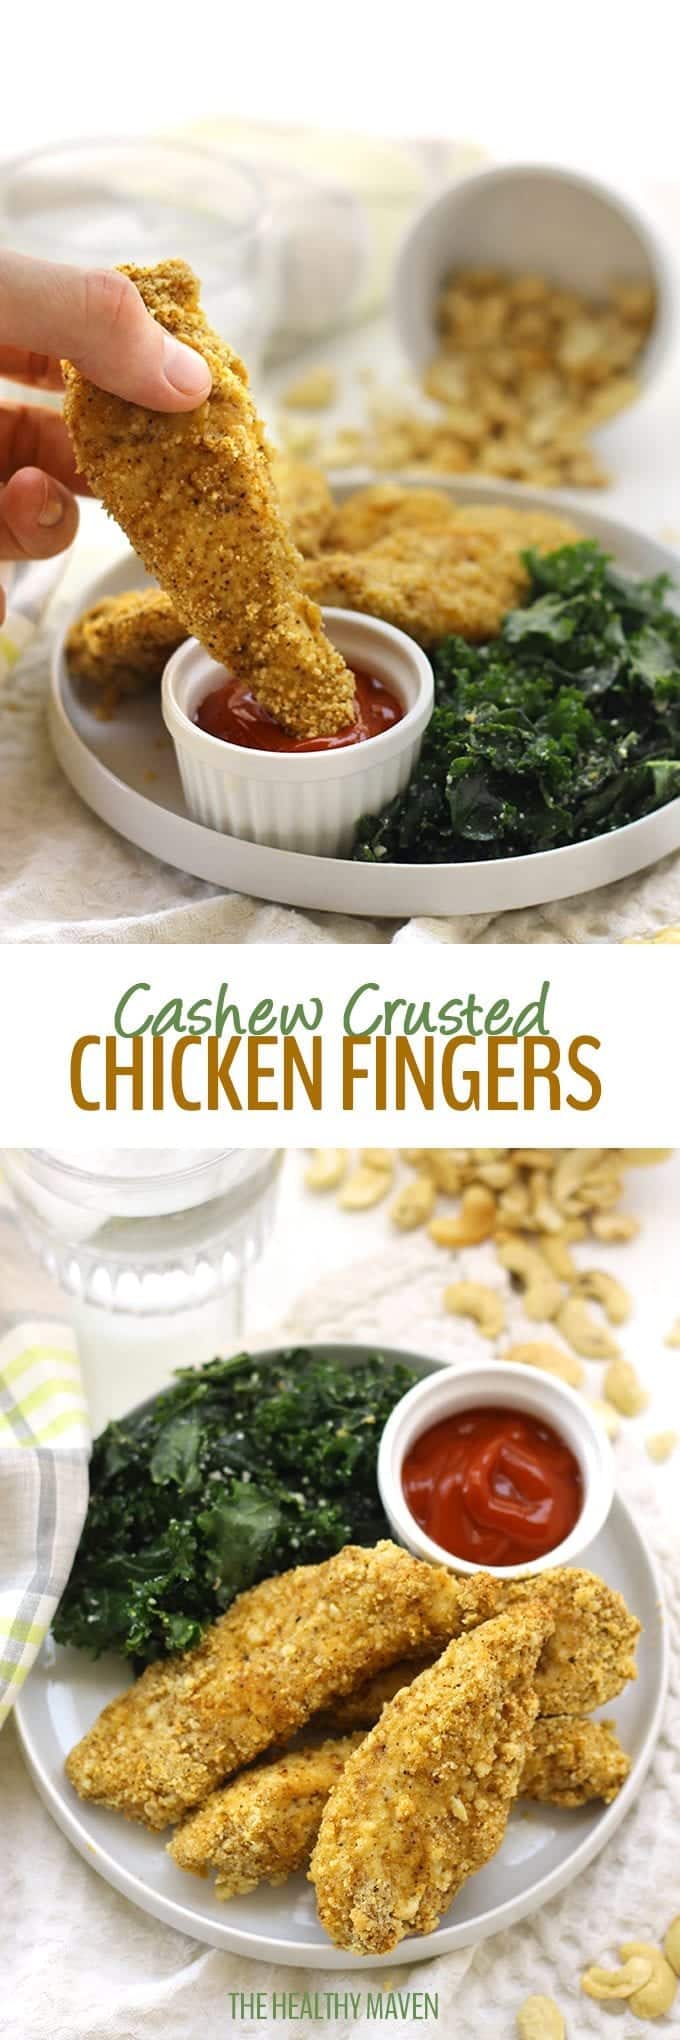 These baked Cashew Crusted Chicken Fingers are perfect for a family friendly weeknight meal or a game day appetizer! They require just 6 ingredients and are ready in less than 30 minutes. 